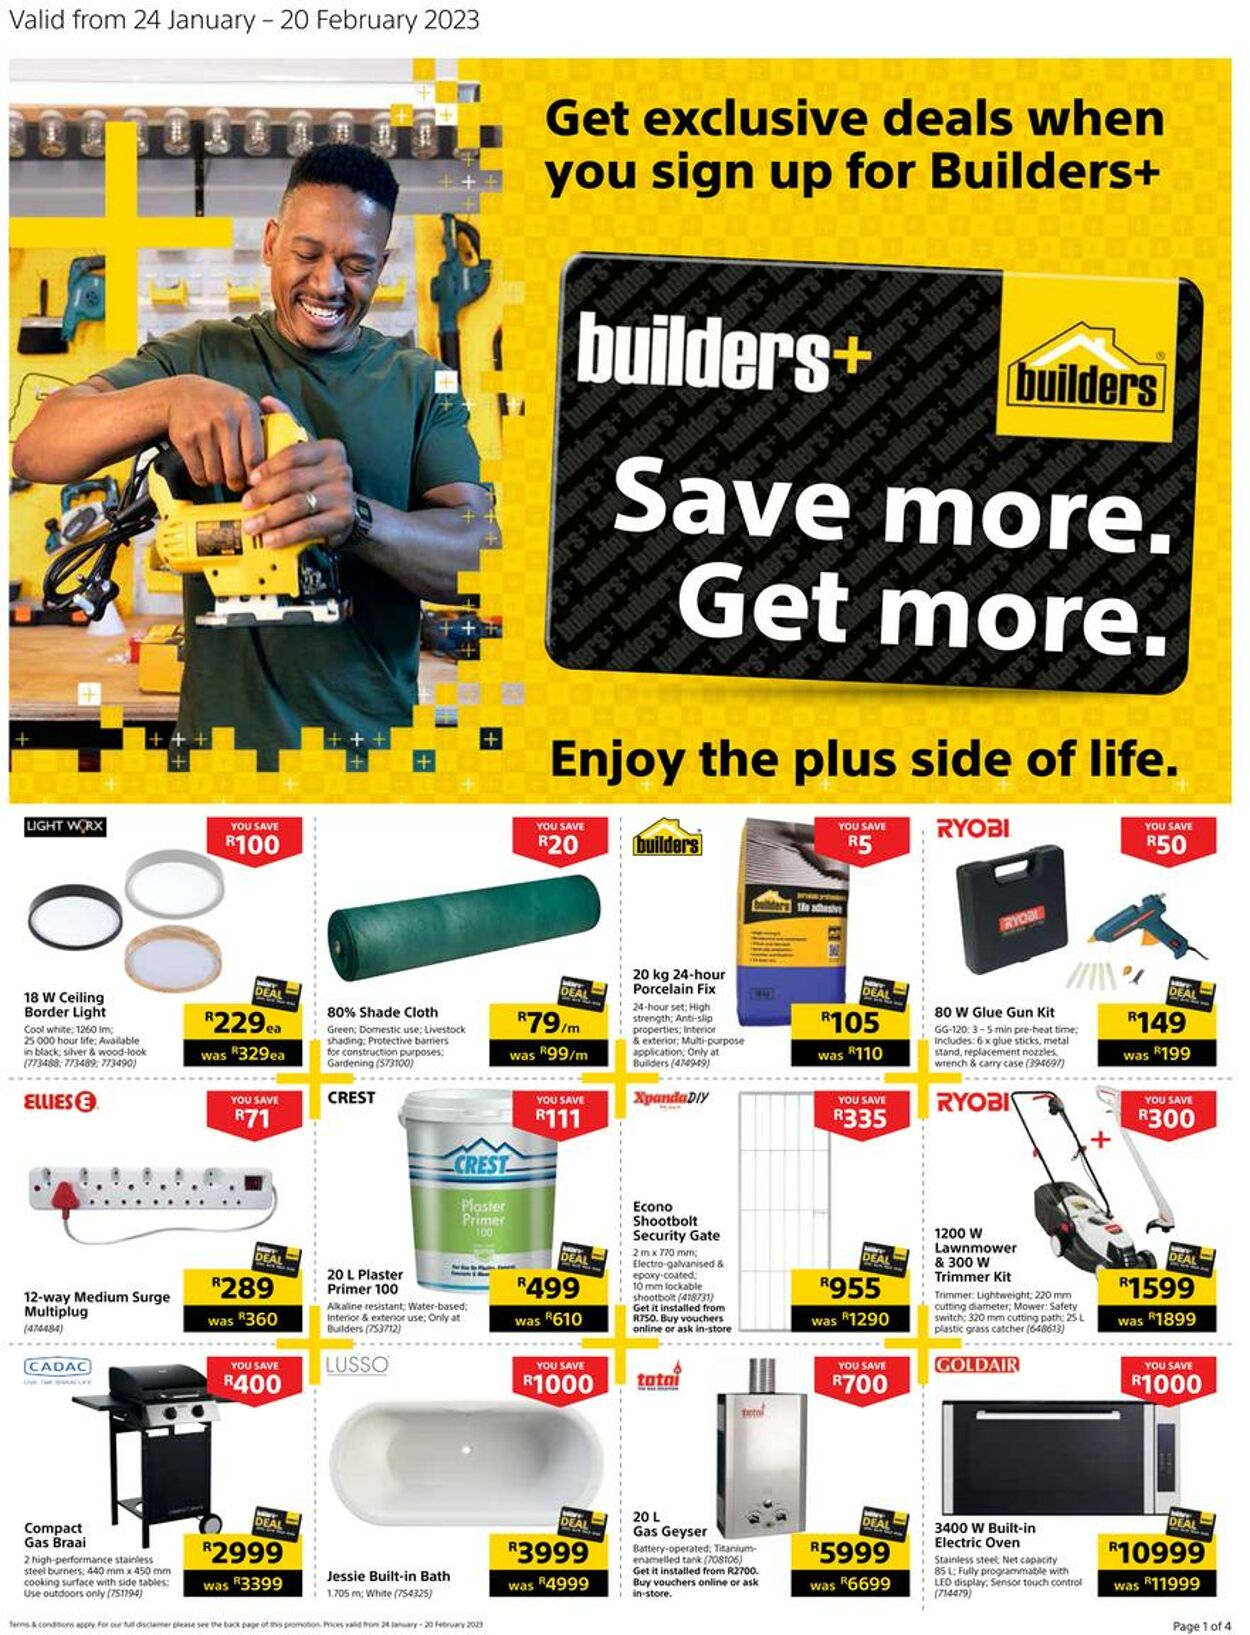 Special Builders Warehouse 24.01.2023 - 20.02.2023